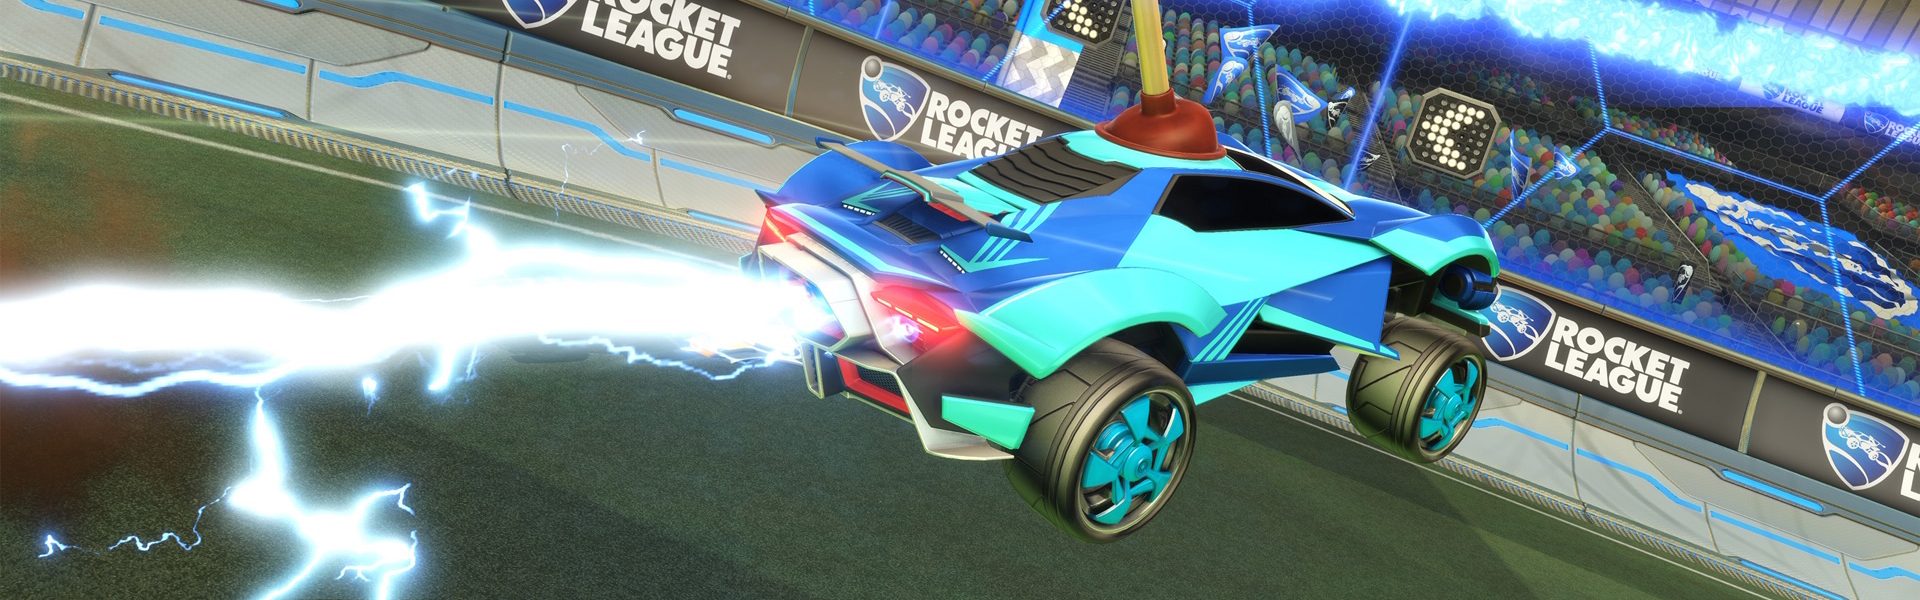 can xbox and ps4 play rocket league